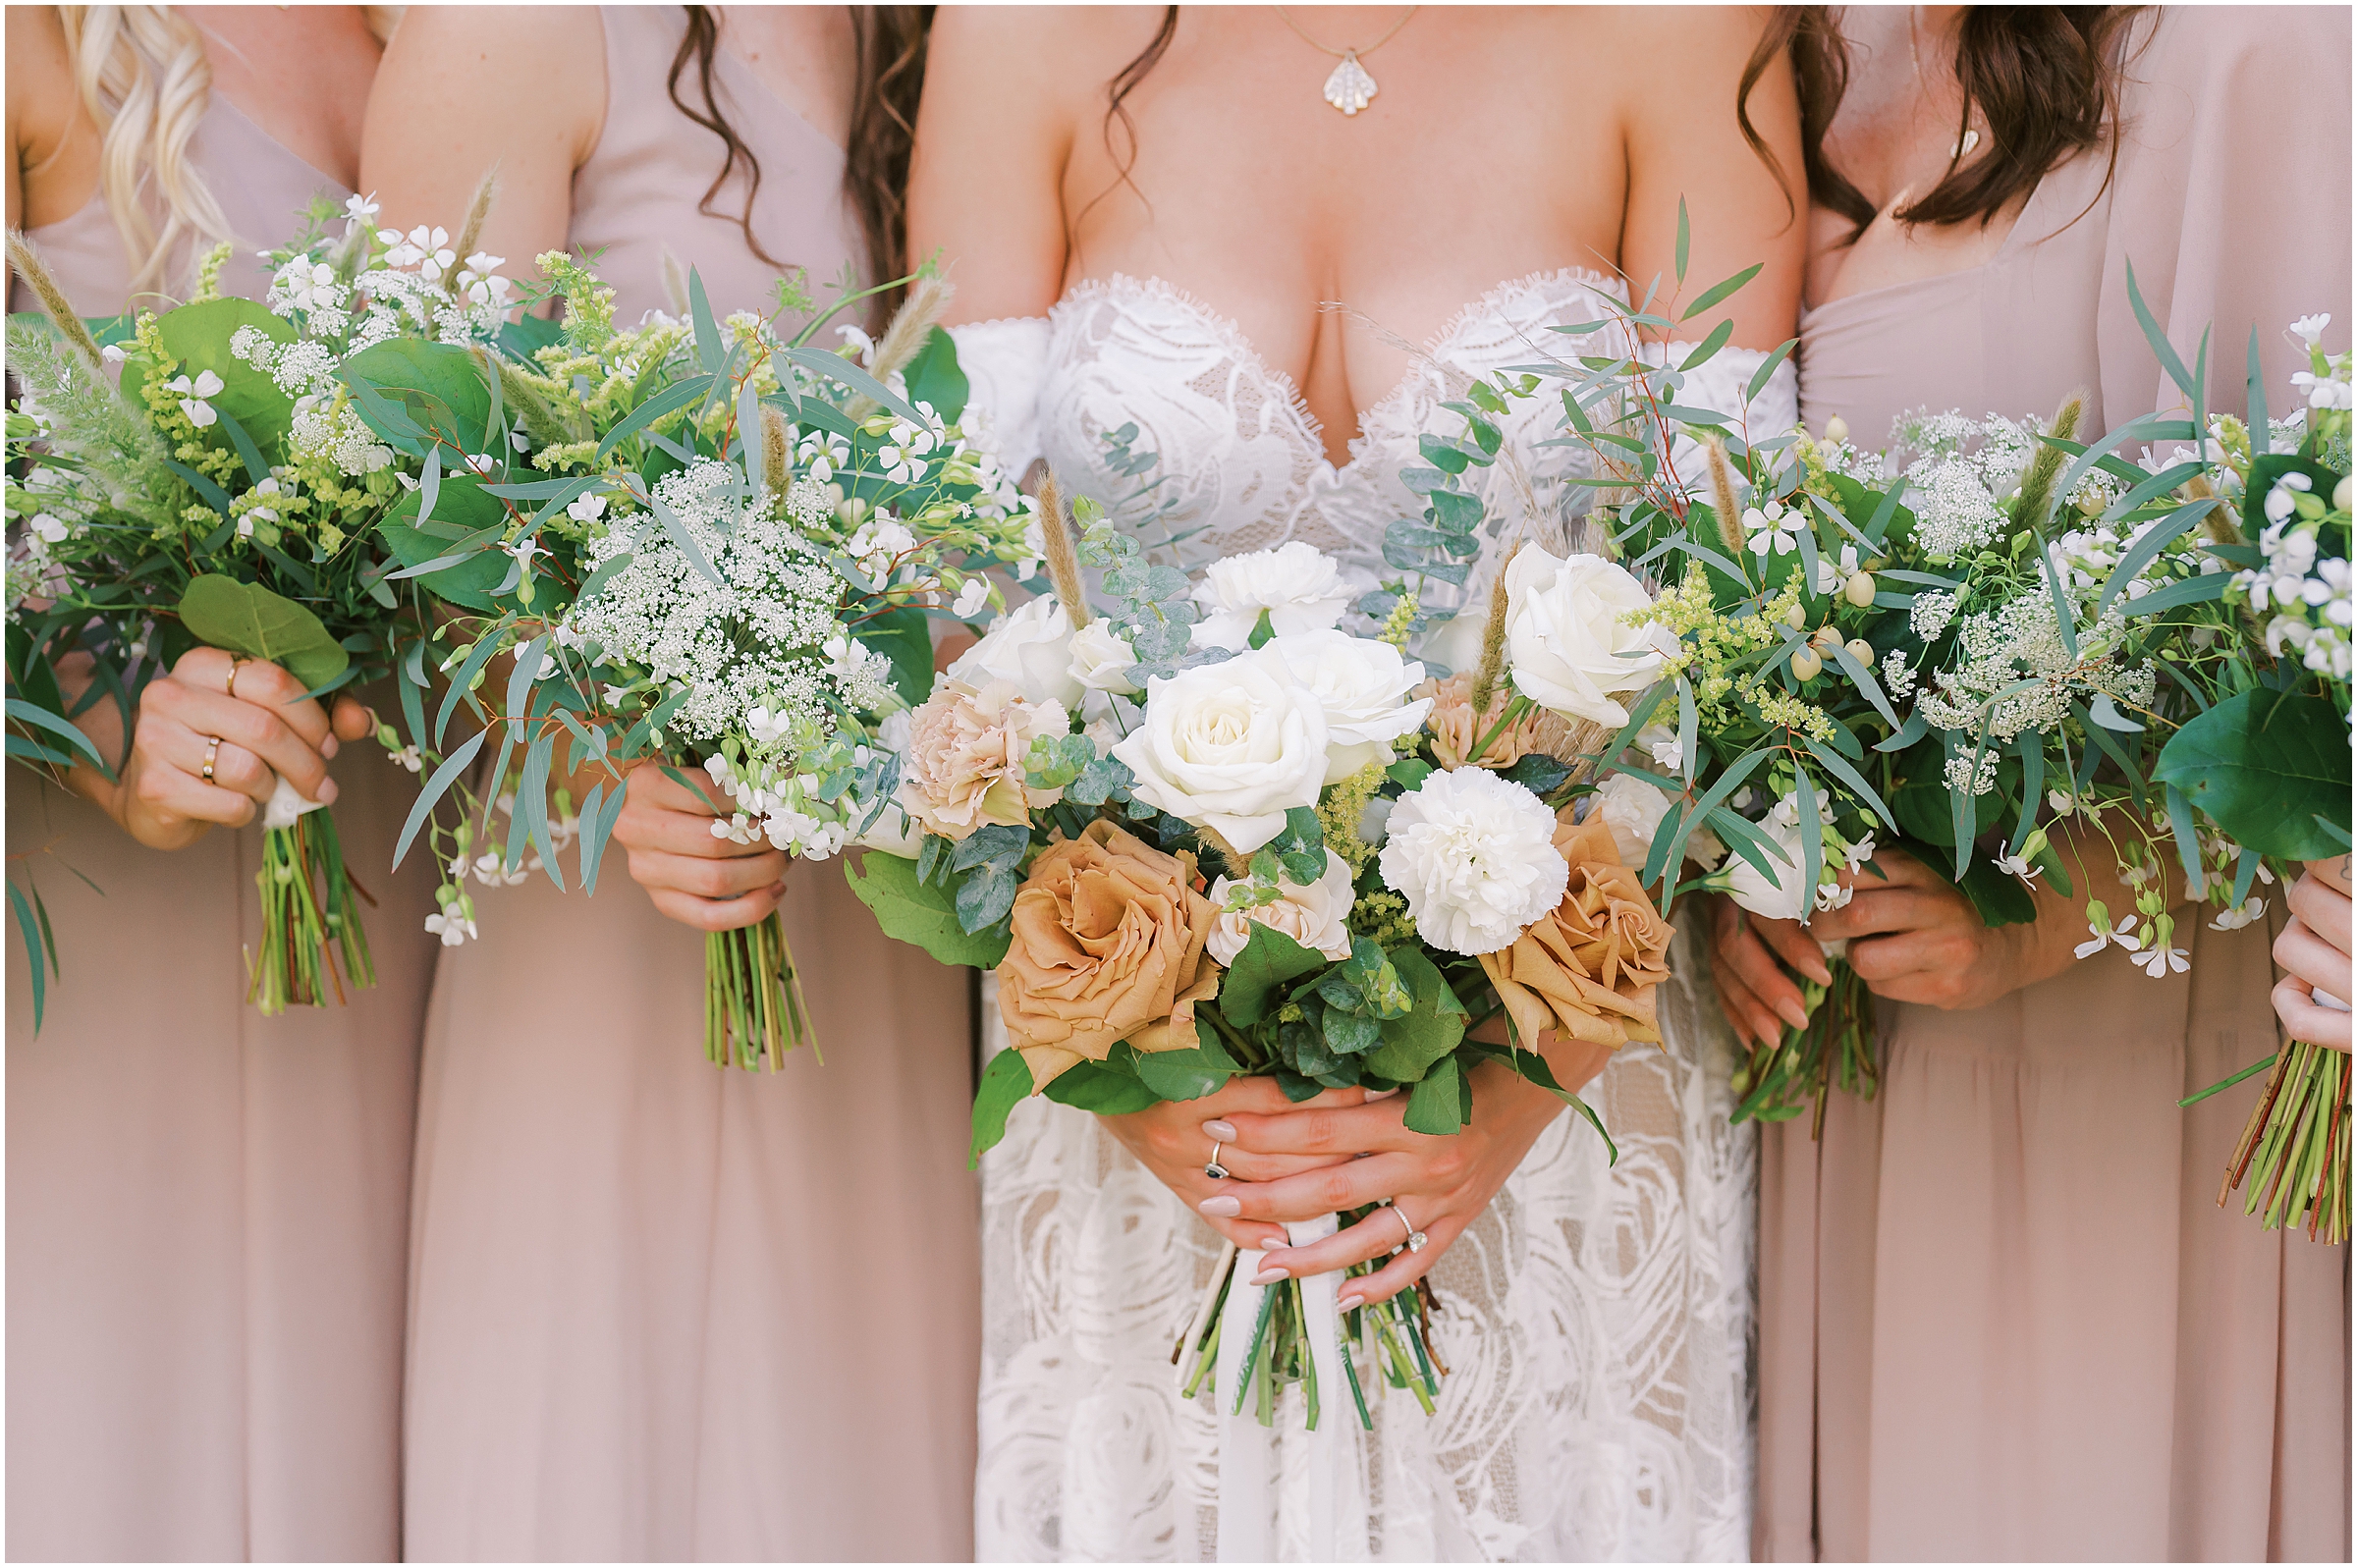 Summer wedding bouquets with hints of tan colored roses